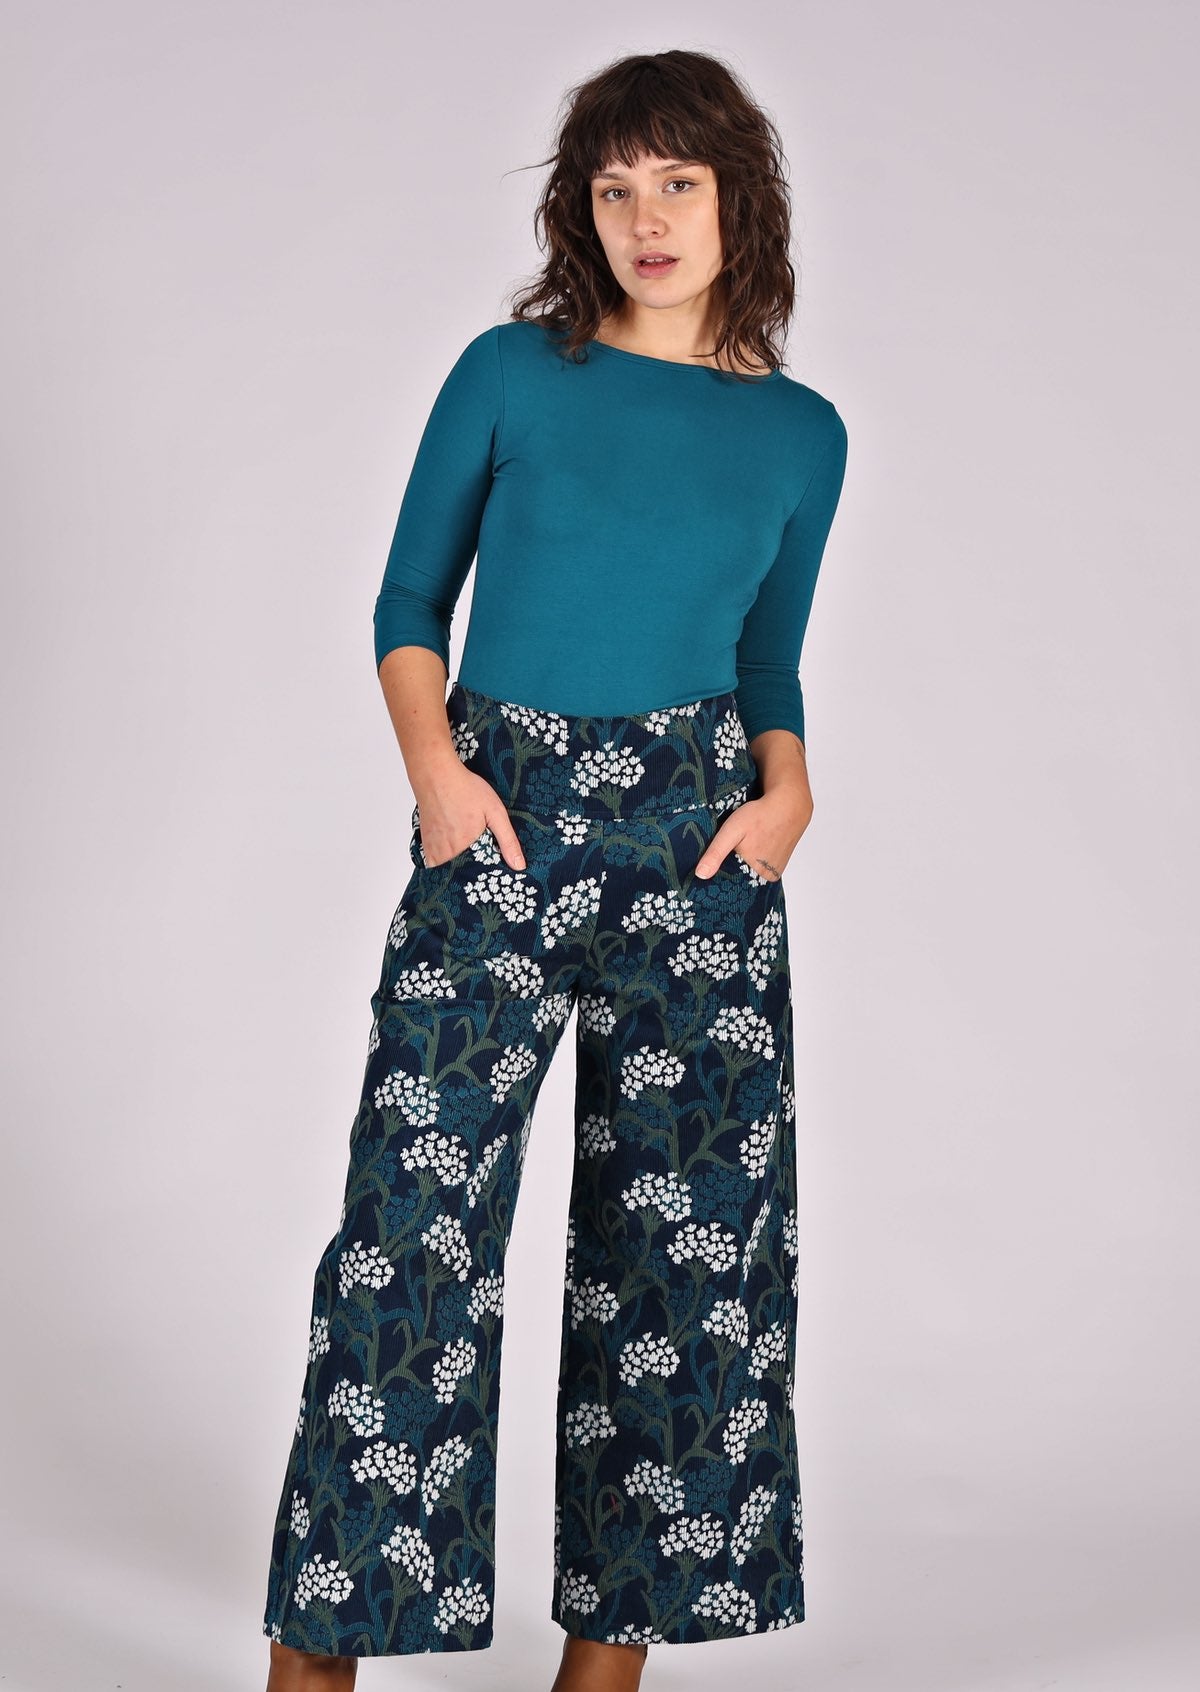 Green and white floral print on blue base cotton corduroy pants